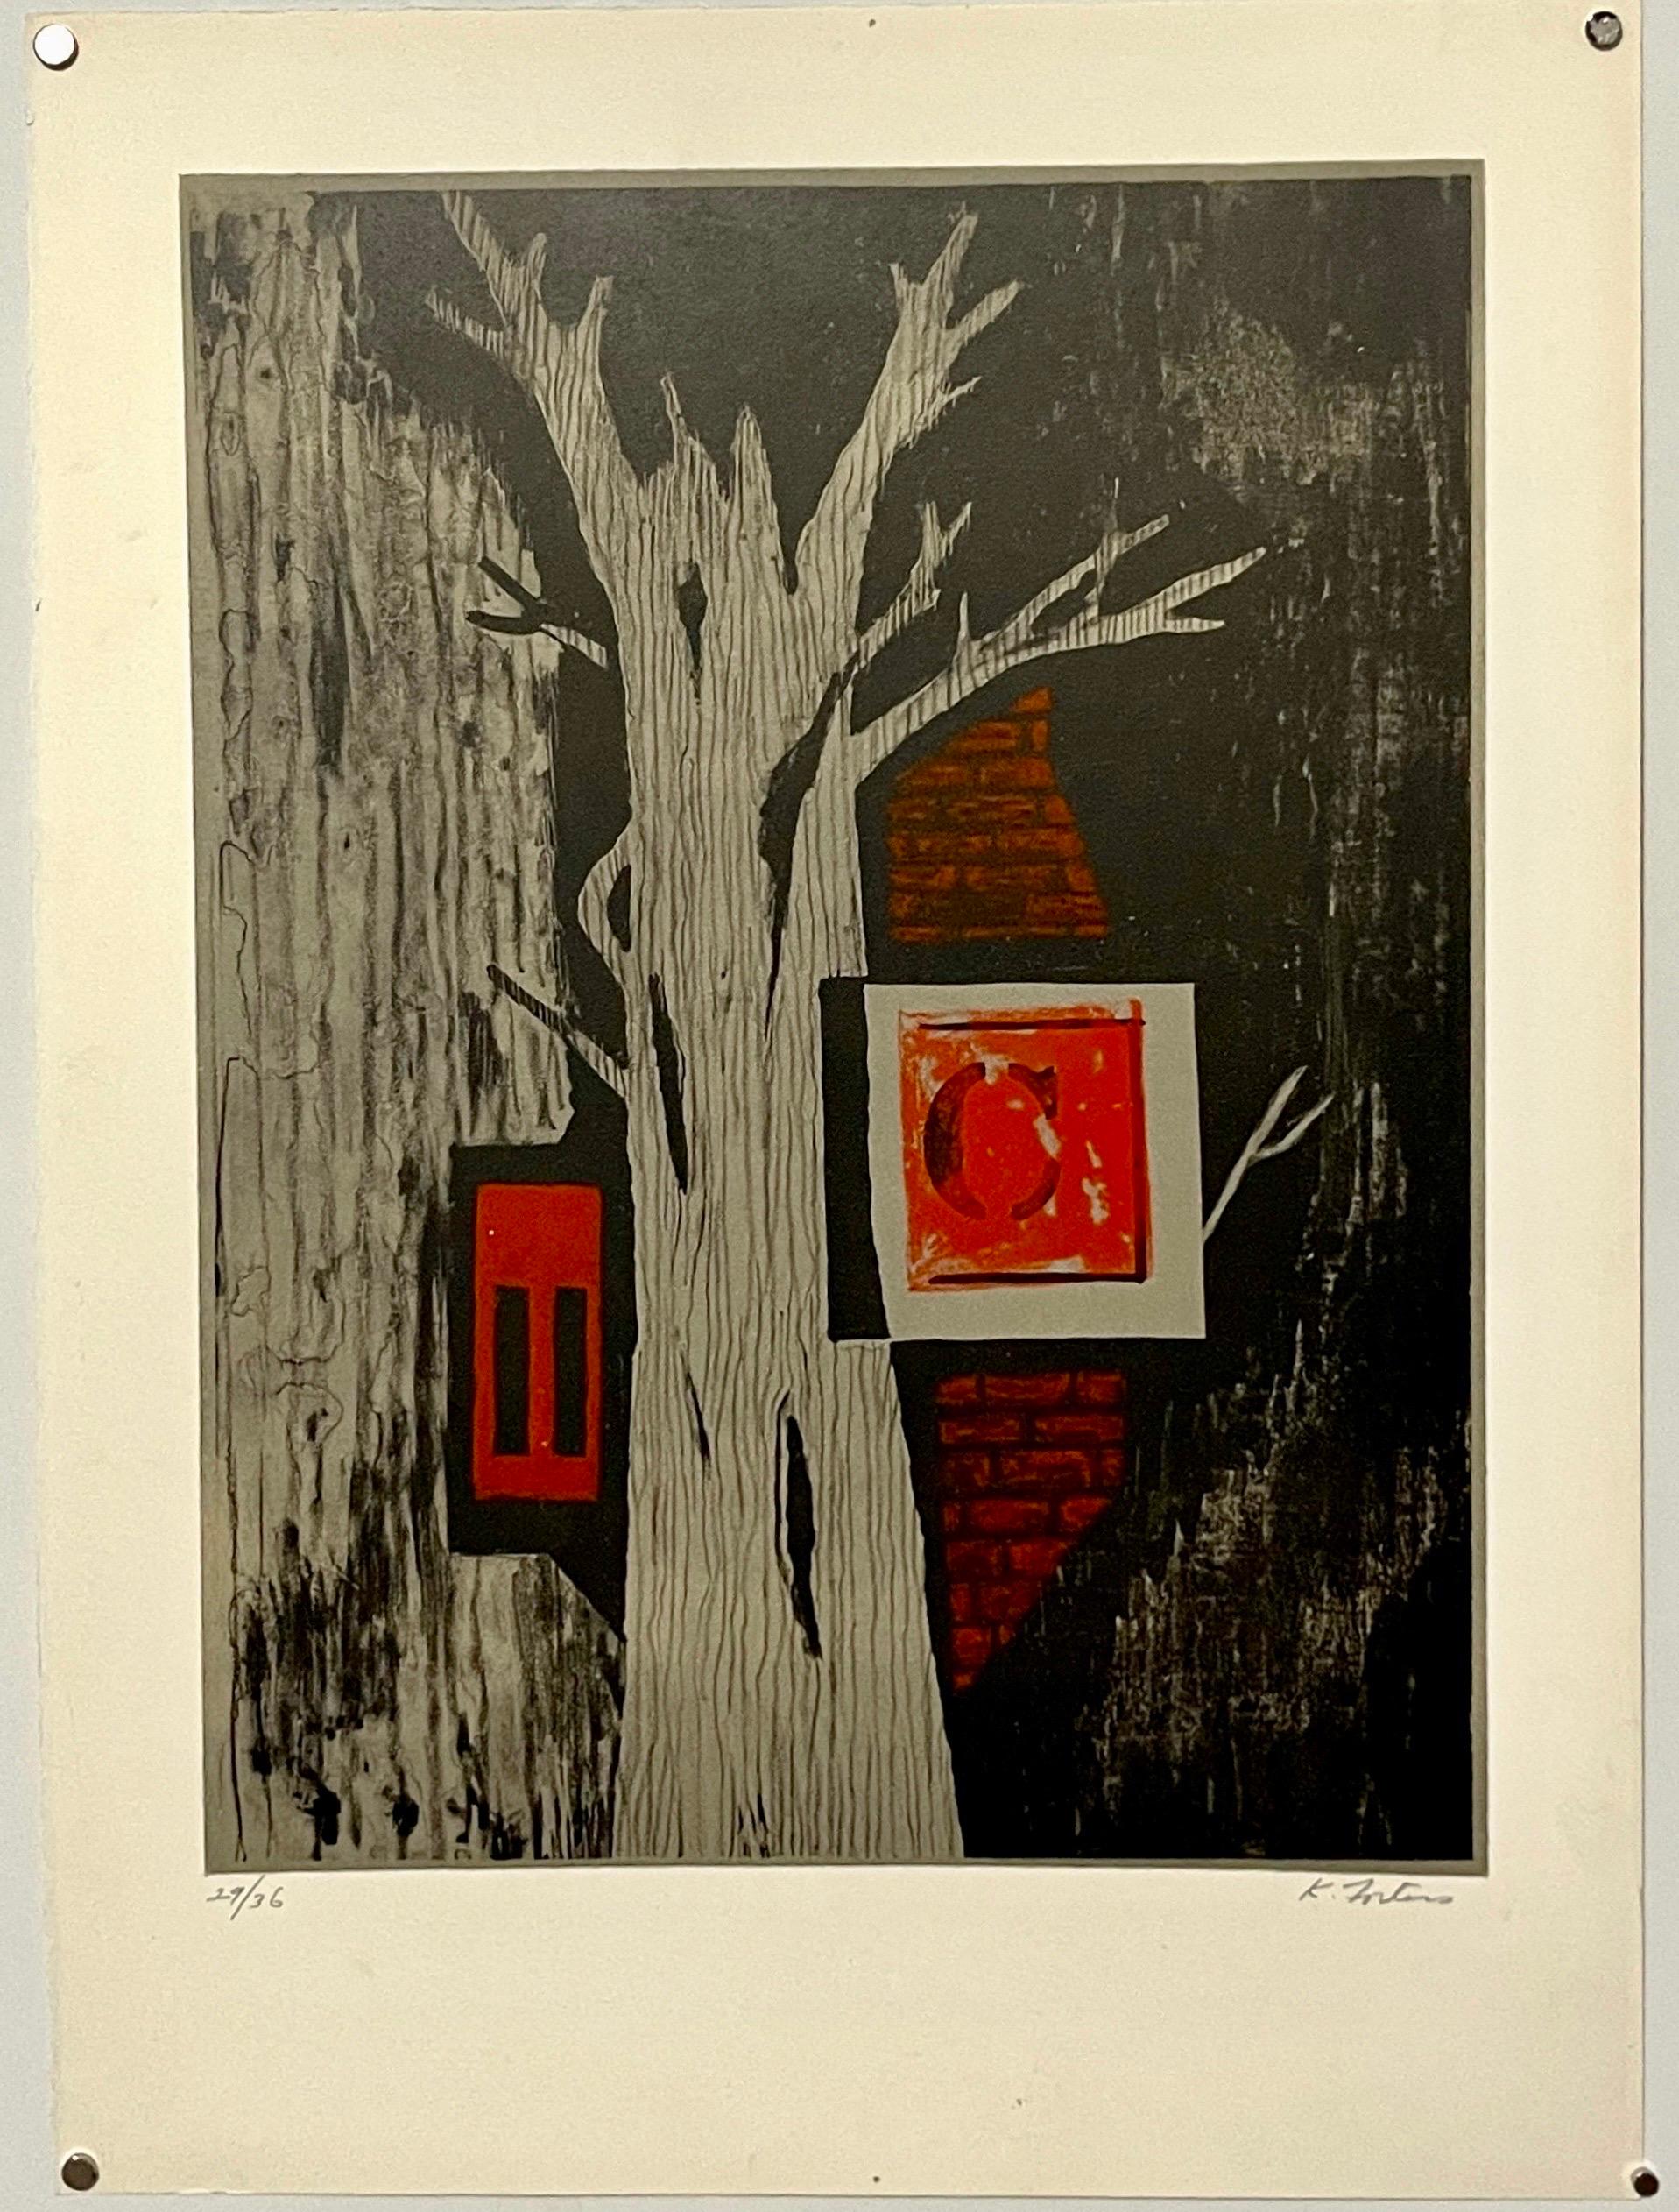 Karl Eugene Fortess (1907-1993) 
Original color lithographs on BFK Rives paper, 
1966, Hand signed and numbered 29/36 in pencil,
Sheet size  20.5 x 15 inches.

Karl E. Fortess (1907-1993) was a painter, printmaker and teacher, of Boston,